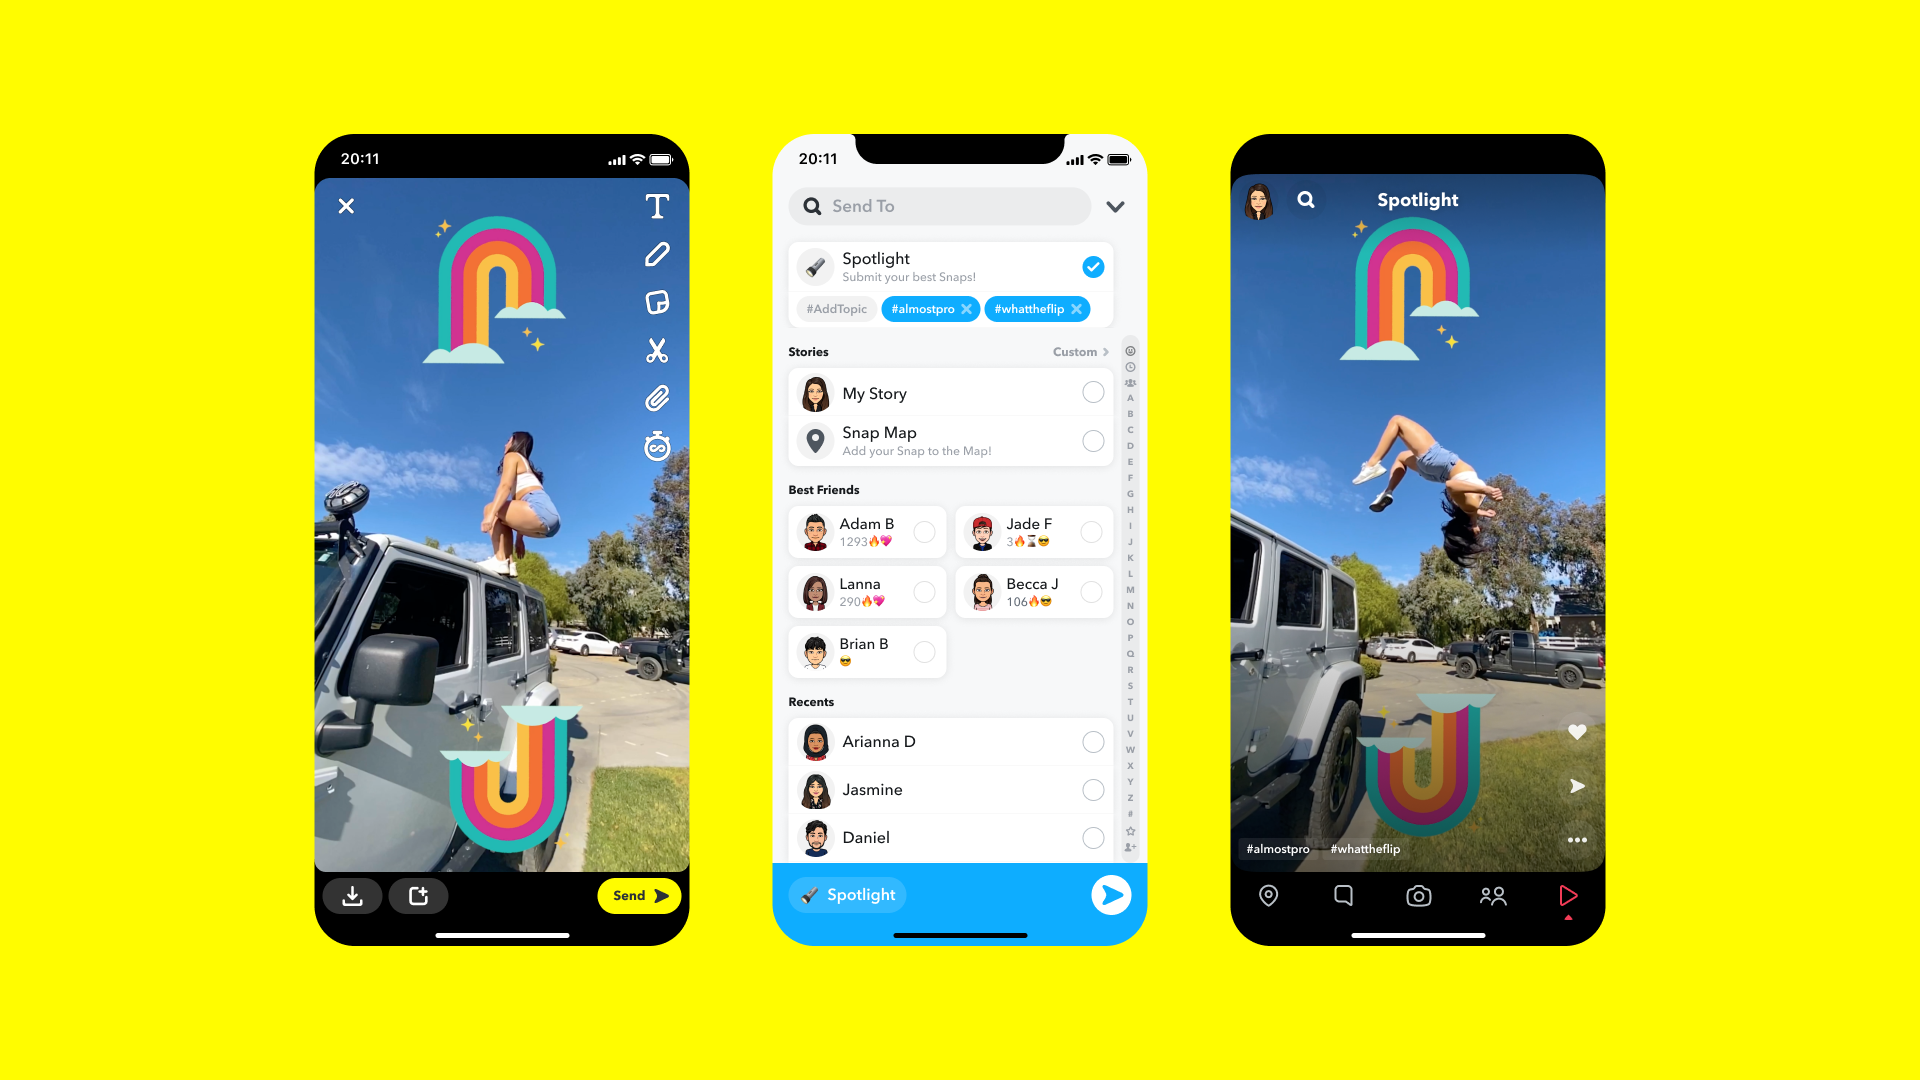 Screenshots of phones with videos and comments using Snapchat's Spotlight feature